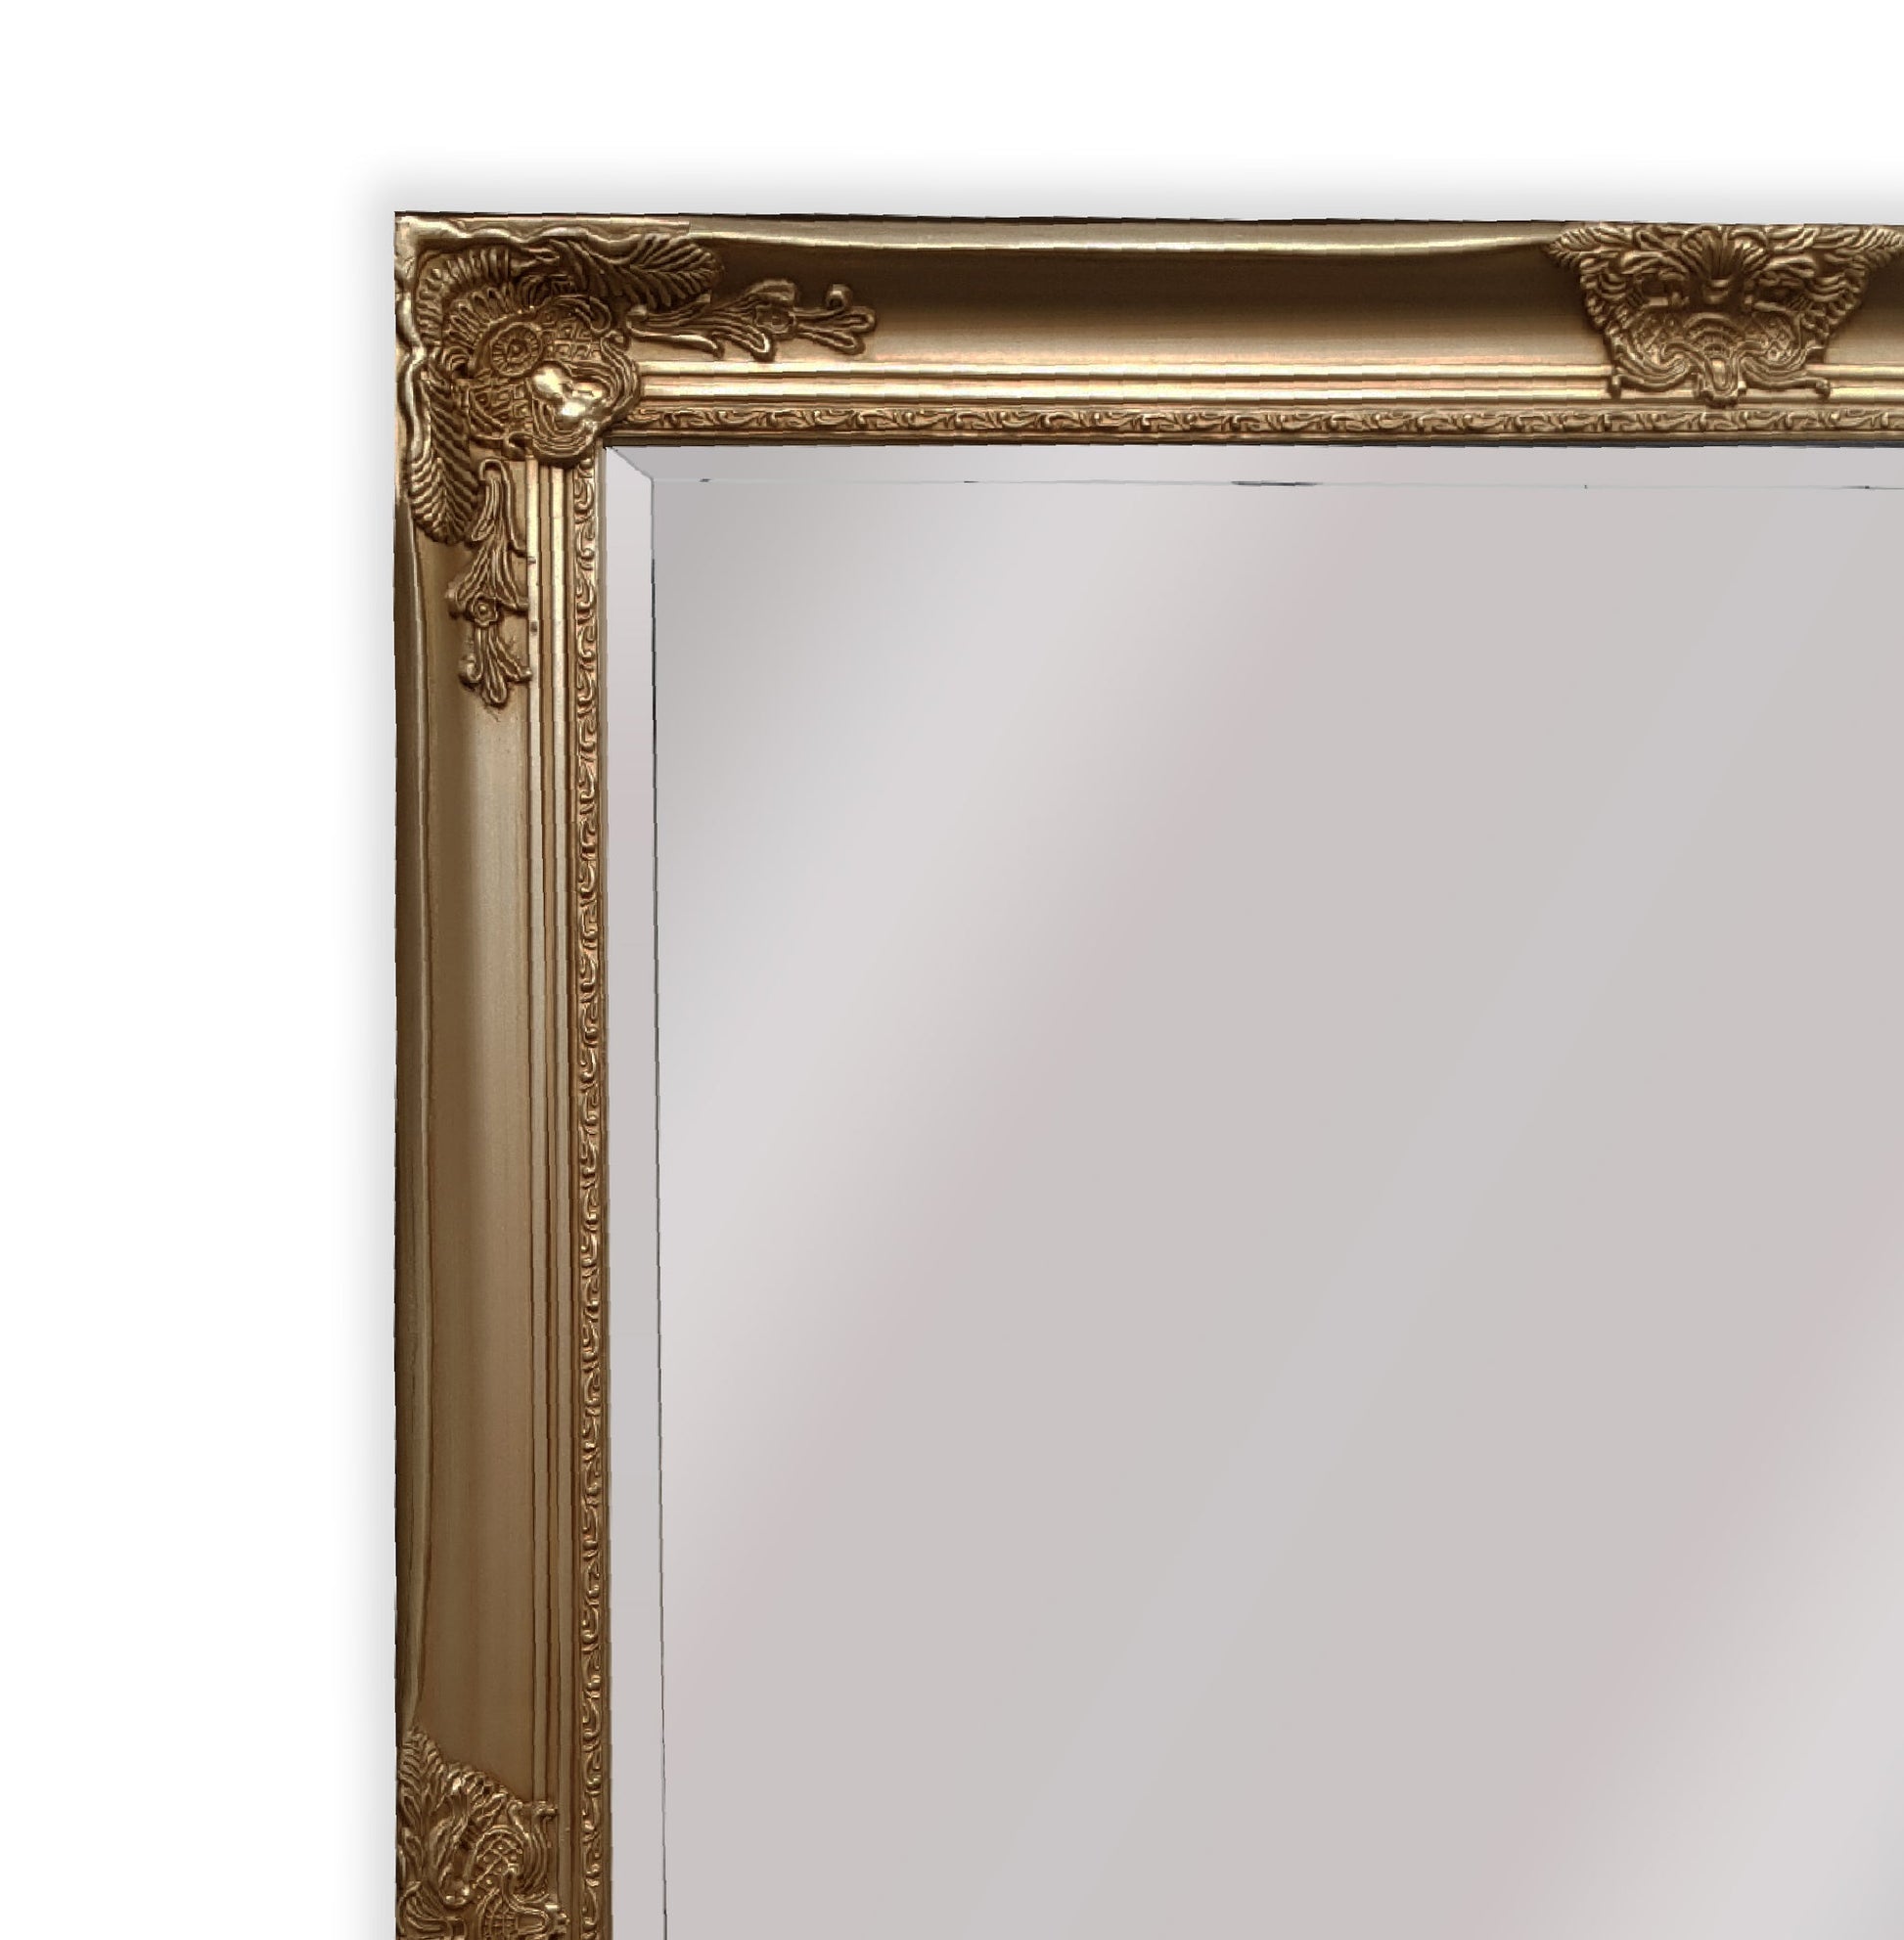 French Provincial Ornate Mirror - ANTIQUE CHAMPAGNE - X Large 100cm x 190cm - image2